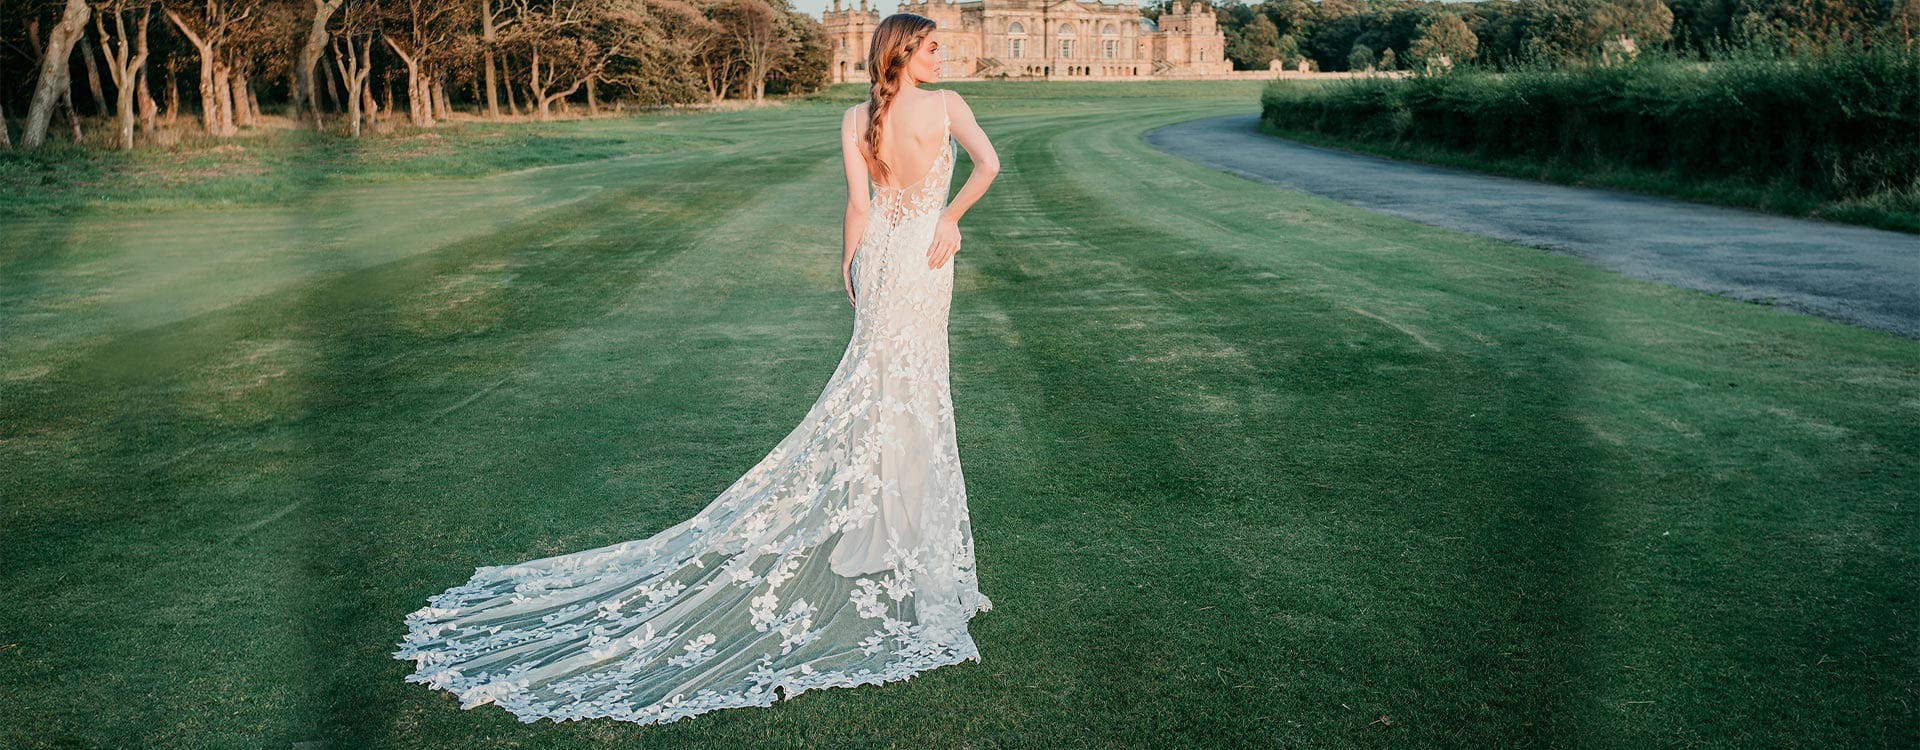 About Pearls Place - Wedding Gown on Grass